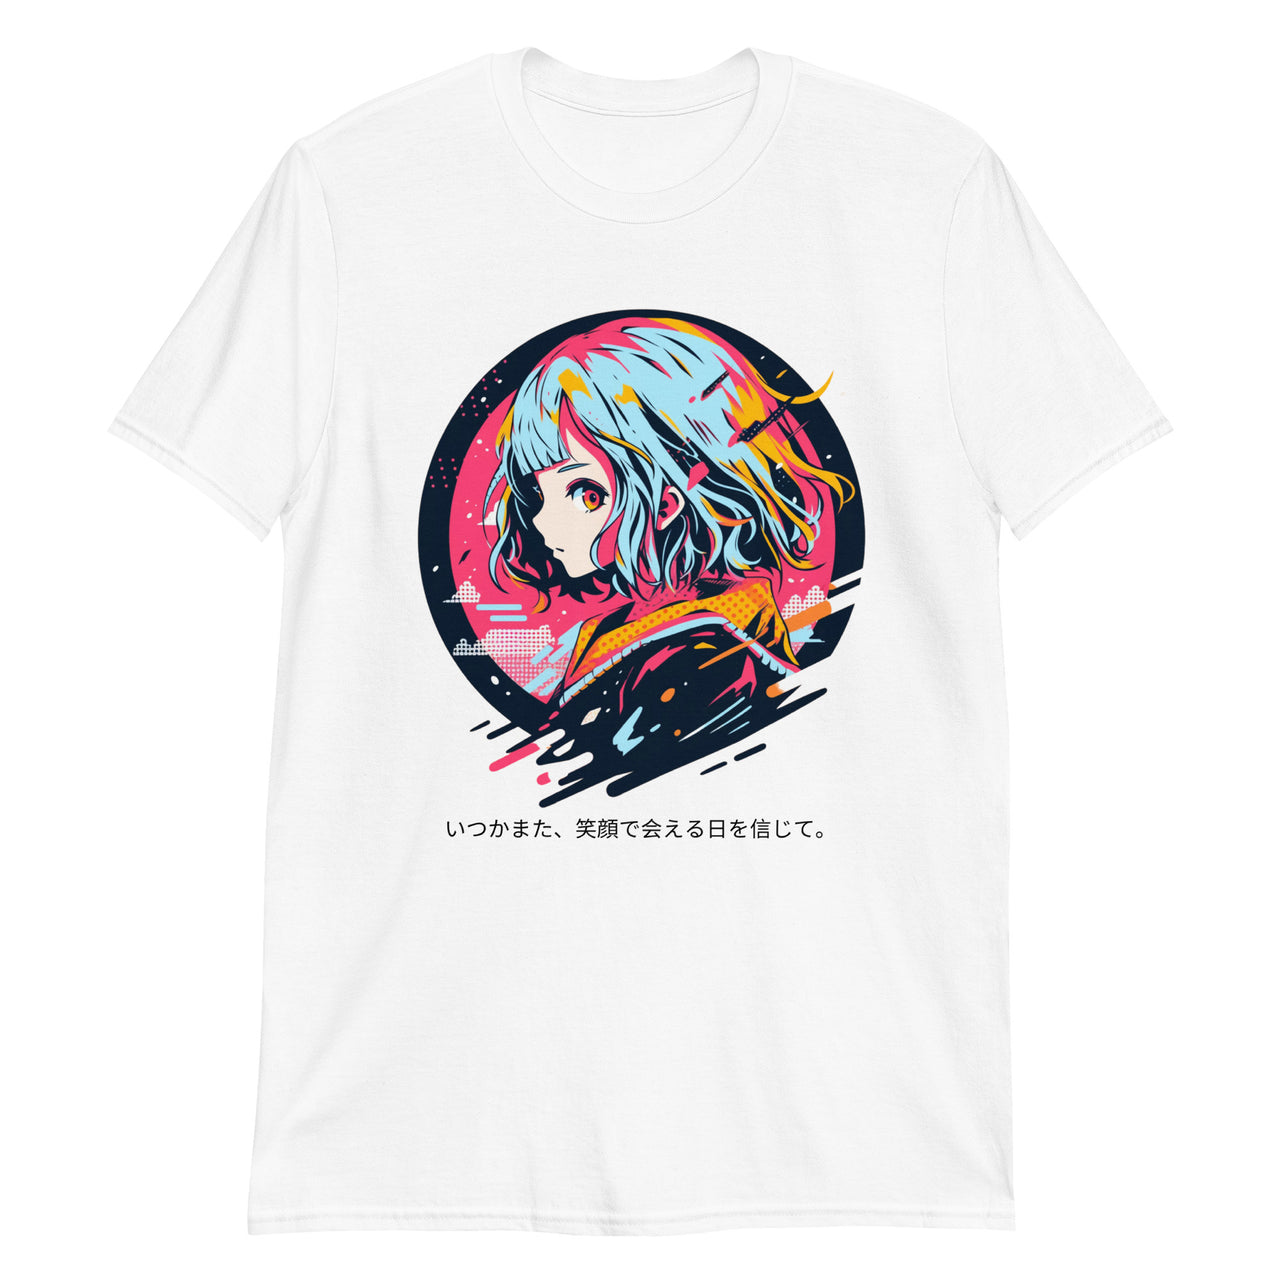 Colorful Anime Girl with Hopeful Message T-Shirt